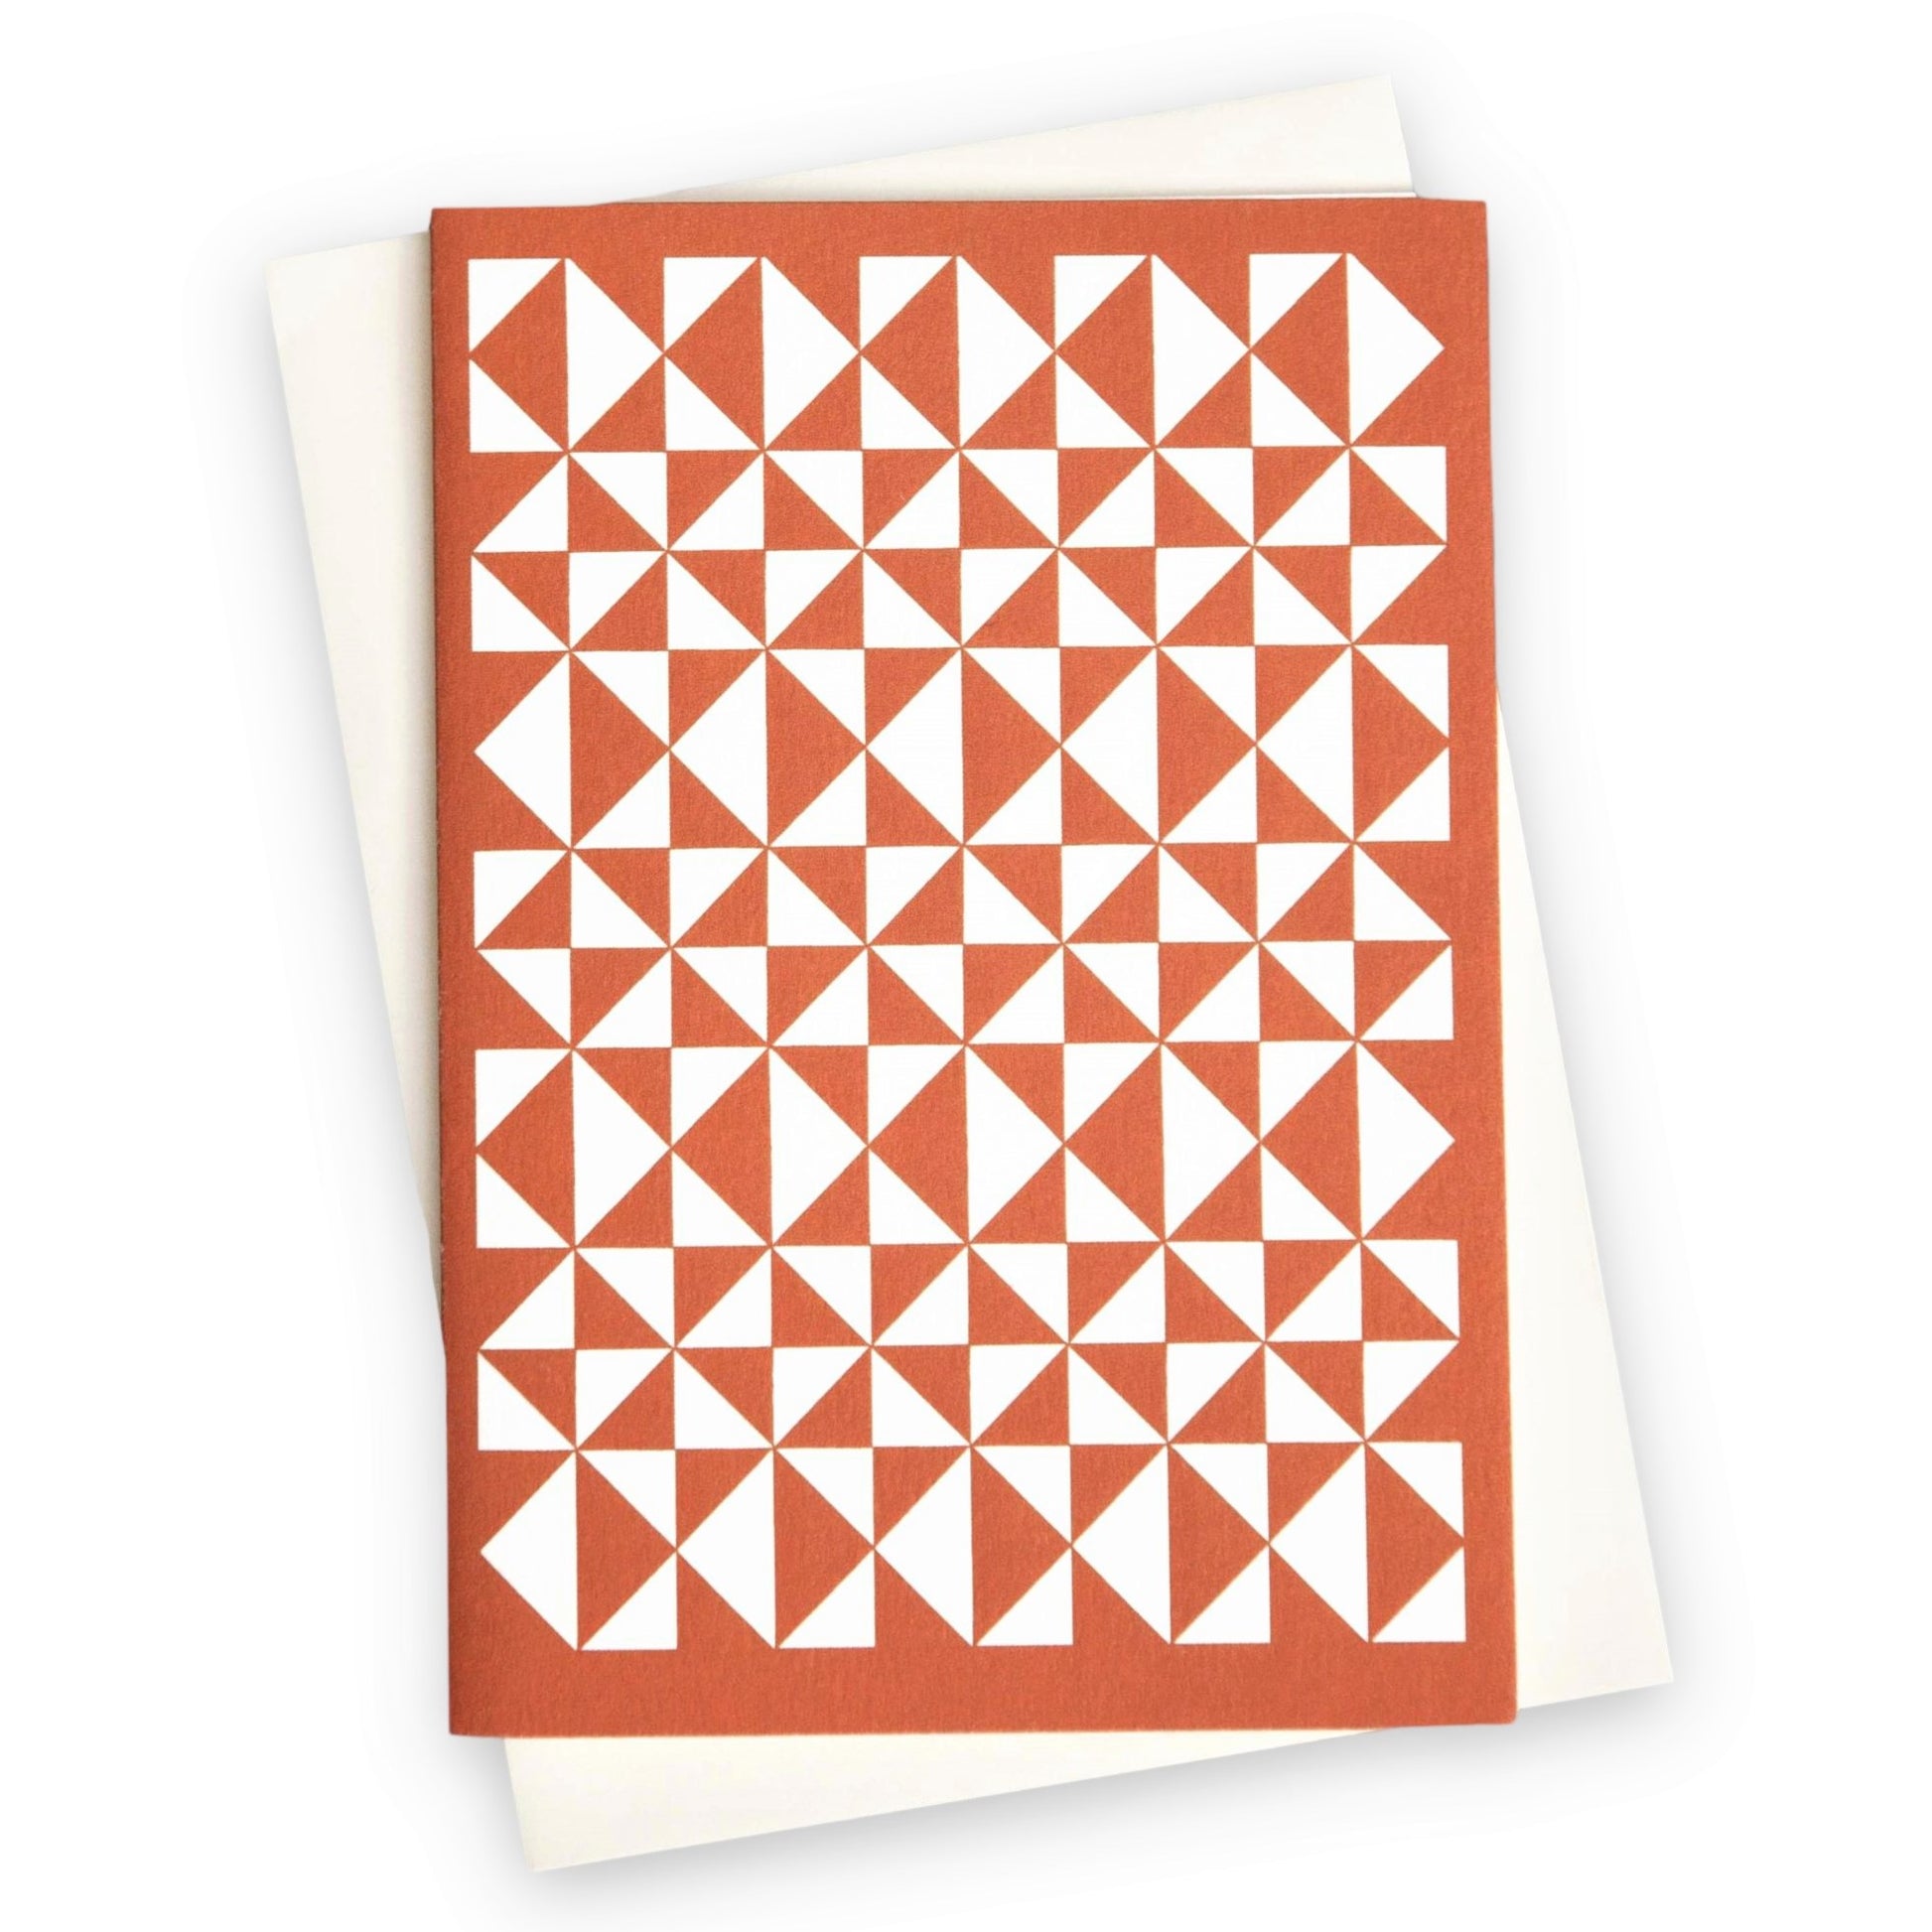 greetings card with abstract triangular pattern in white and brick red by Ola Studio